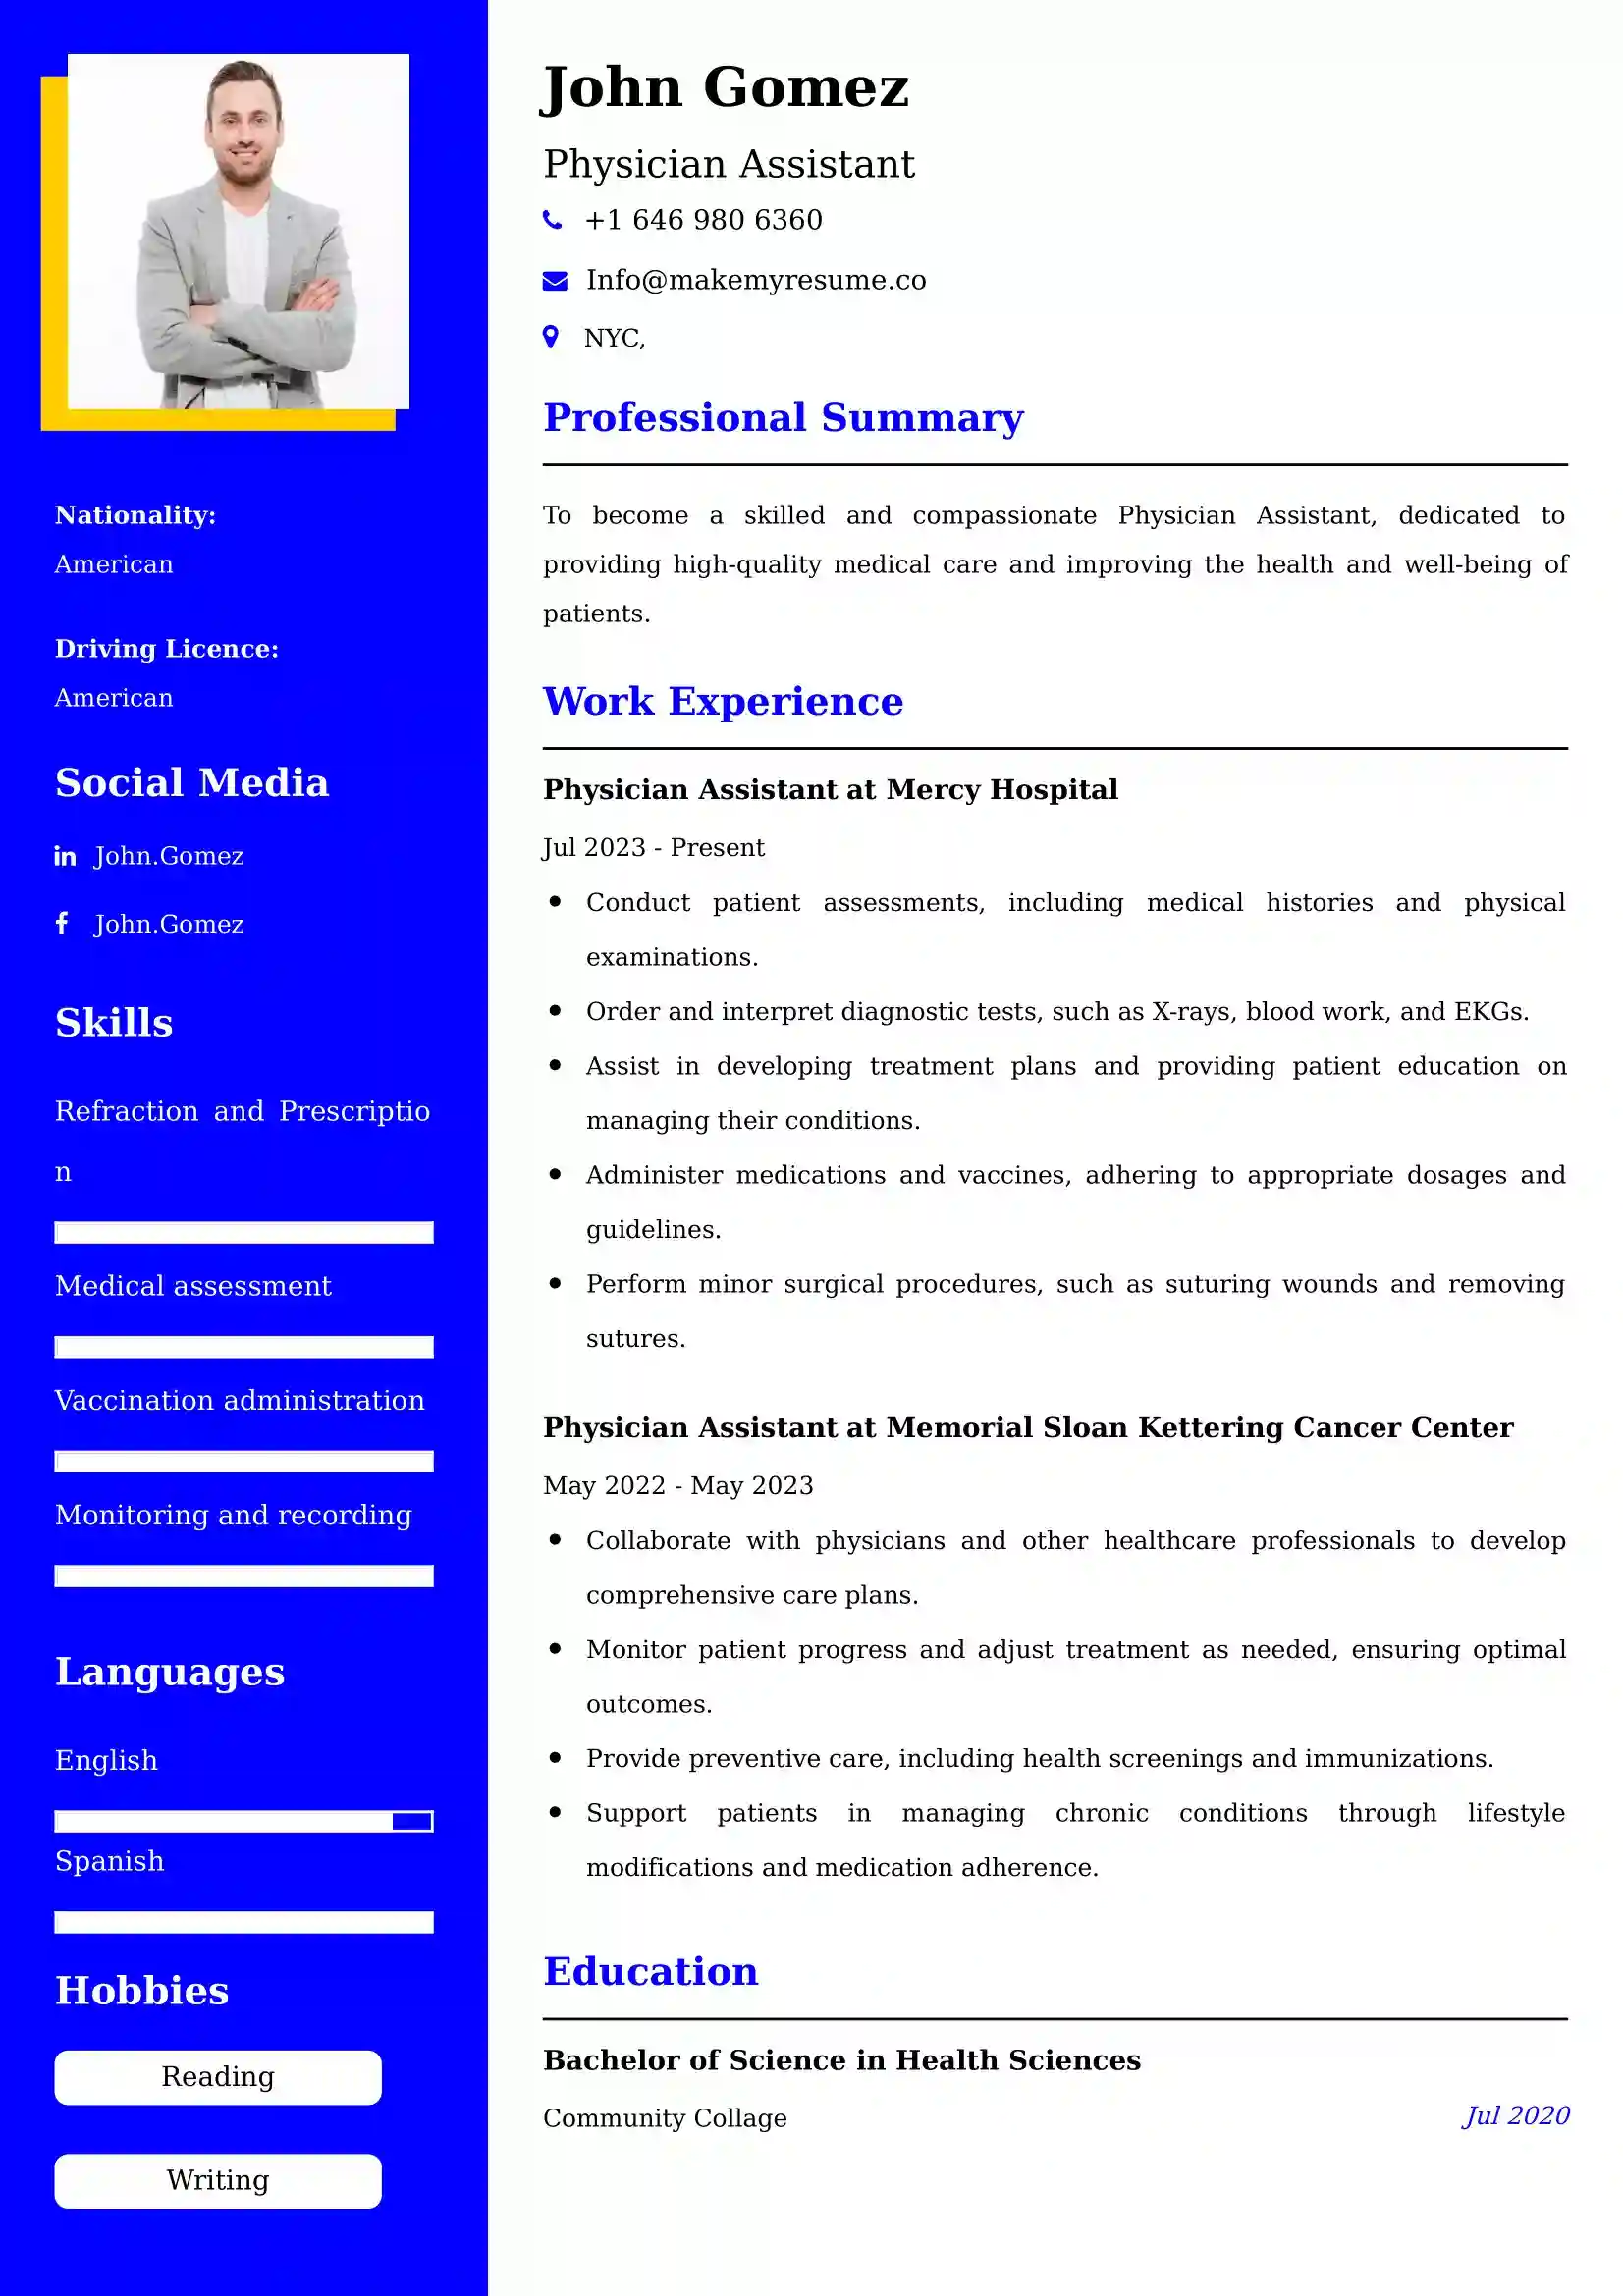 Physician Assistant Resume Examples - UK Format, Latest Template.